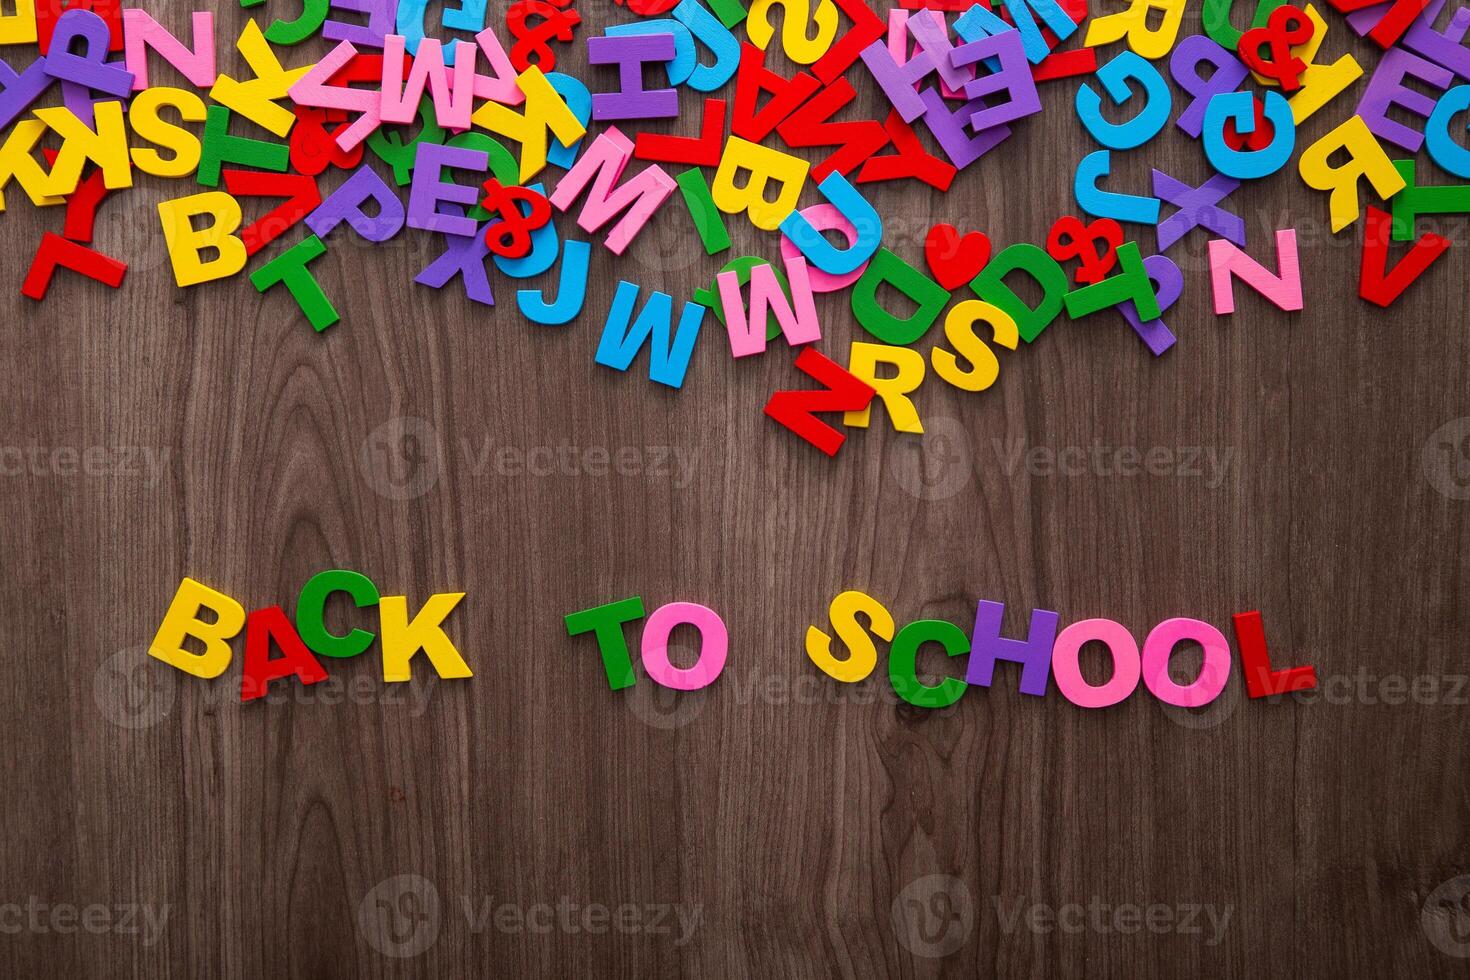 Back to school sign formed from colorful plastic letter on wooden background photo